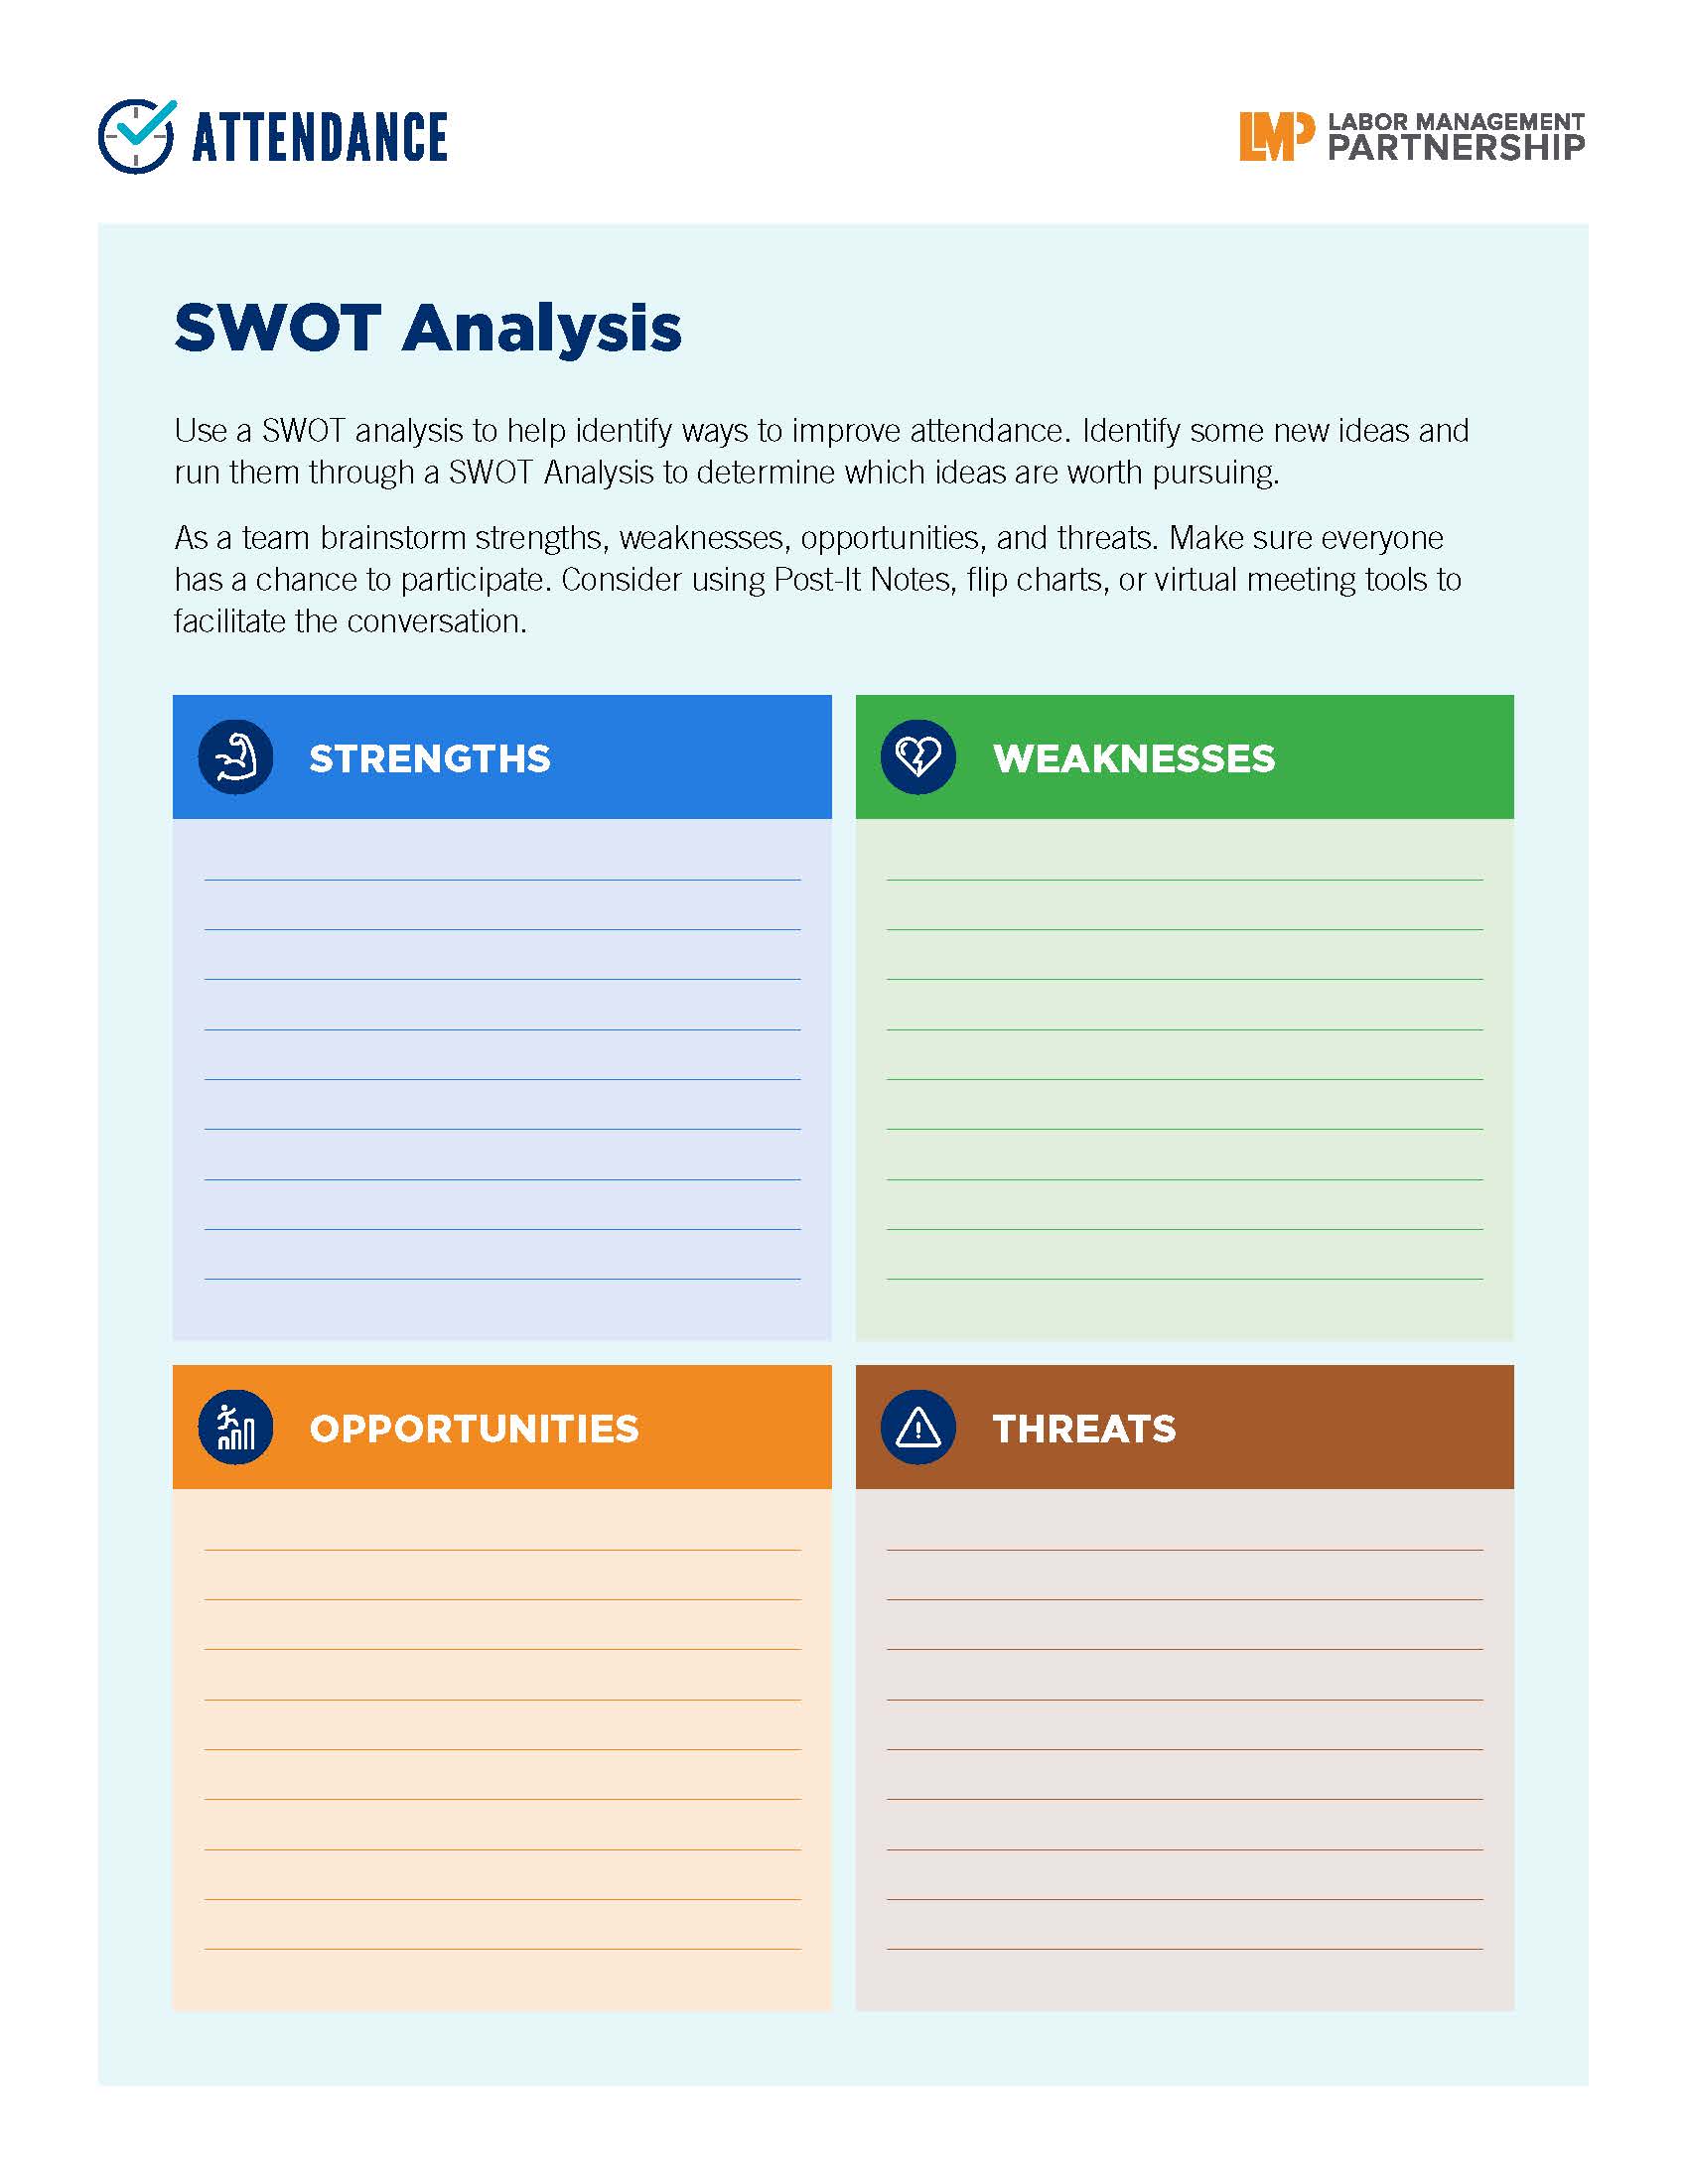 brightly colored flier showing a SWOT matrix